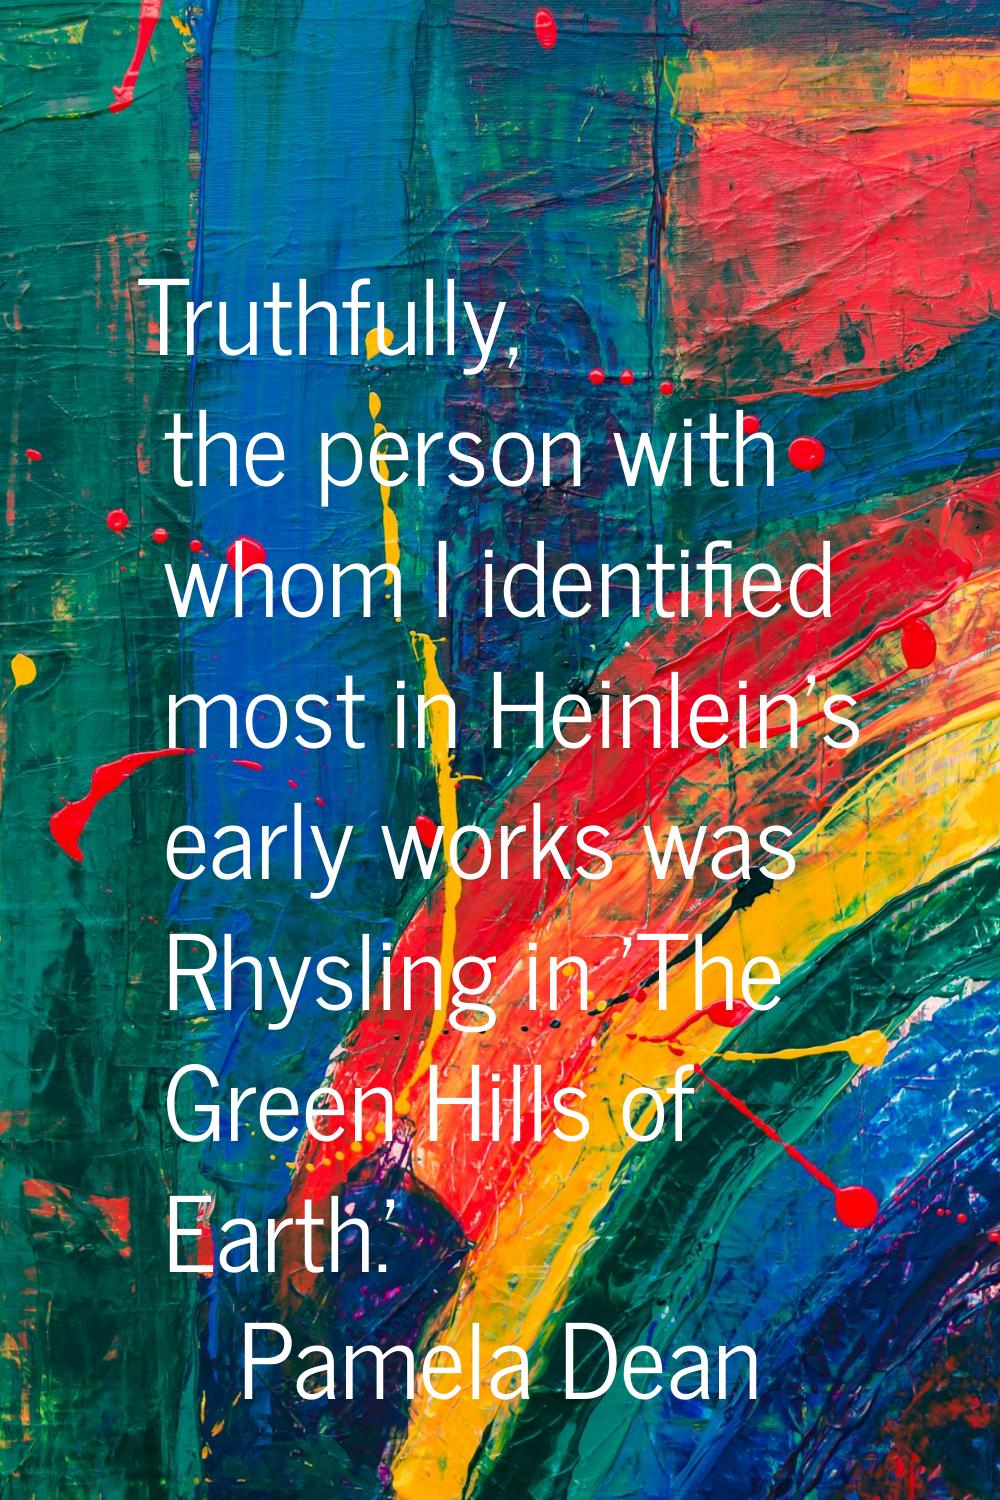 Truthfully, the person with whom I identified most in Heinlein's early works was Rhysling in 'The G